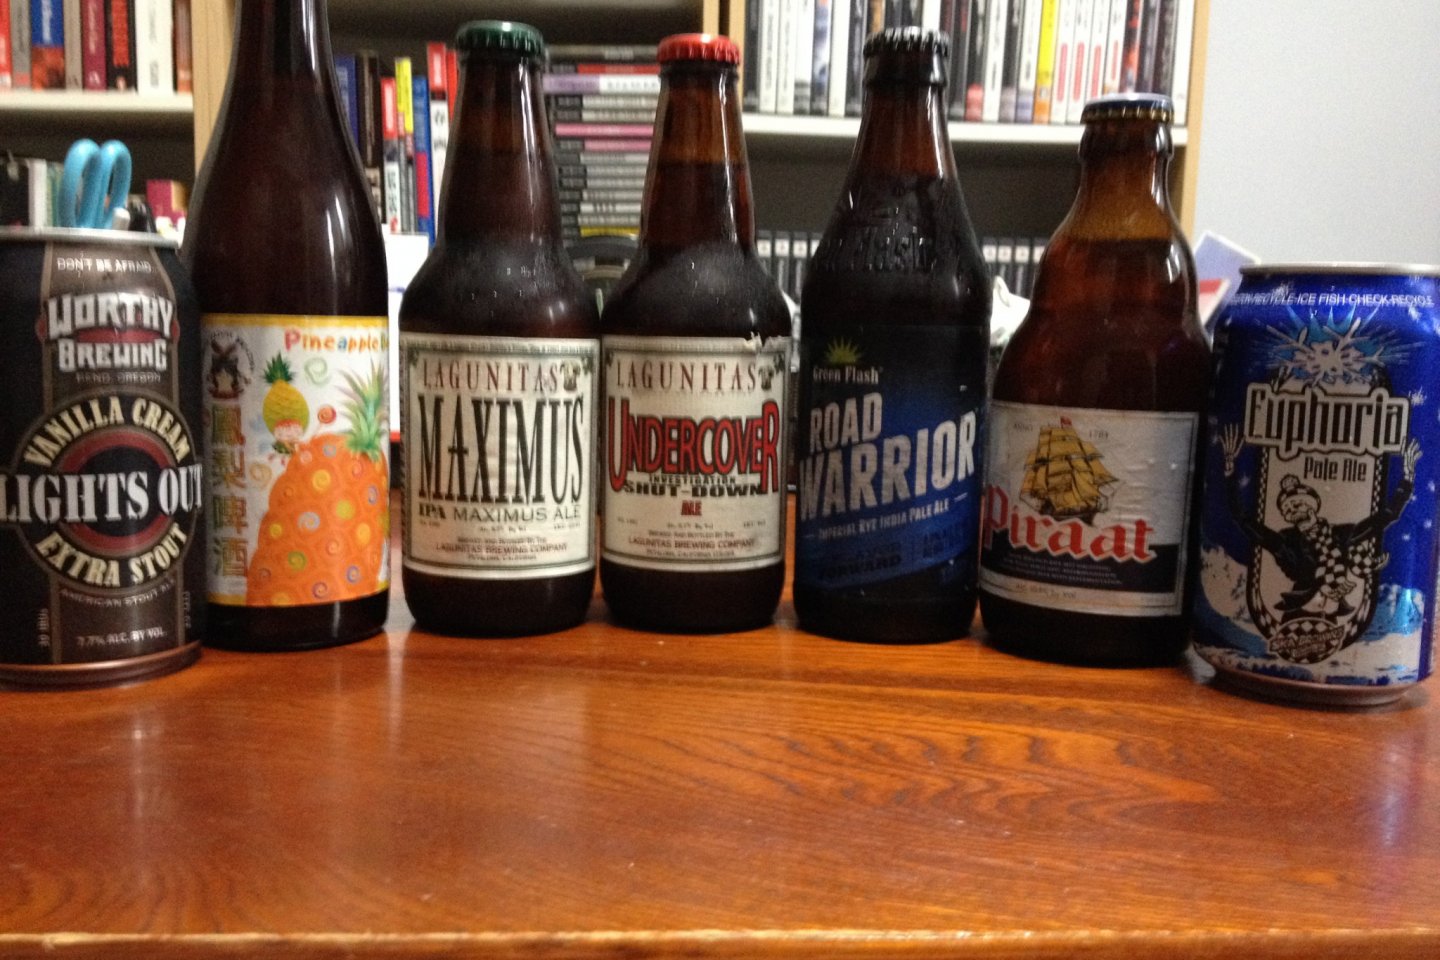 The beers that I purchased the last time I went to Bier Markt